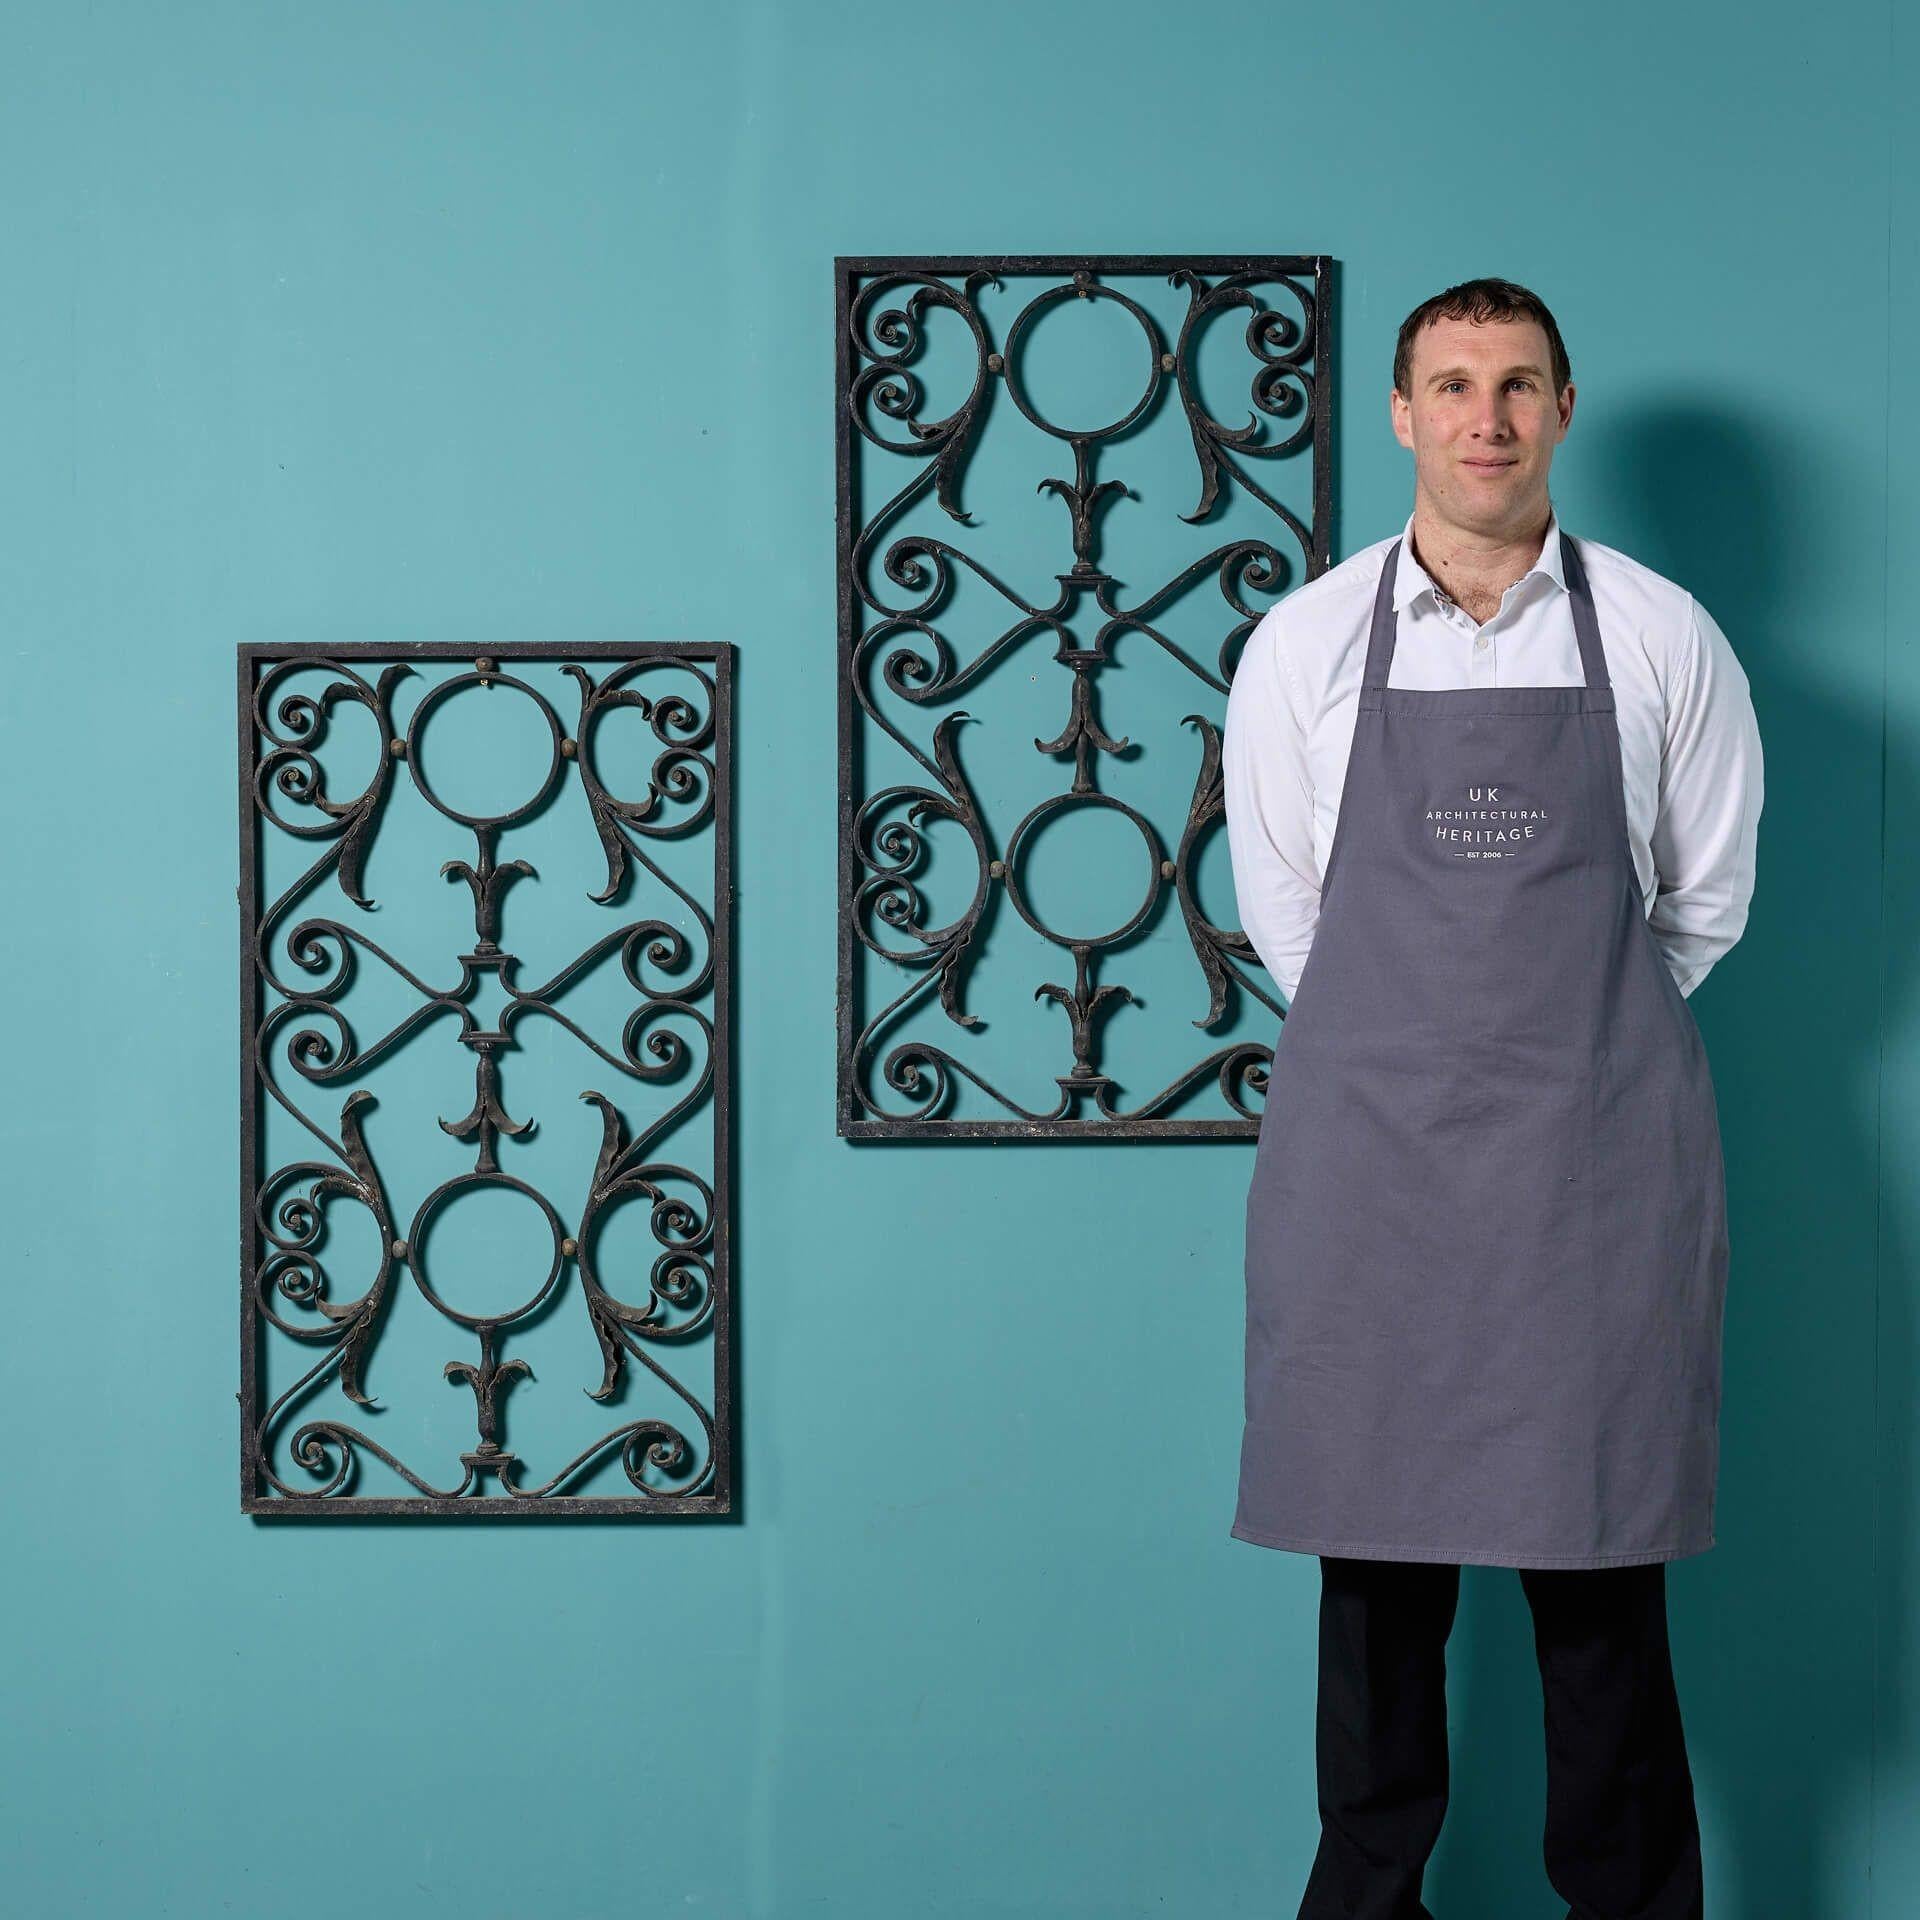 A pair of antique wrought iron panels. These panels are an ode to their English Blacksmith, made from wrought iron with an unusual elegant scrolling leaf and foliage design. In Georgian style, these panels could be used decoratively in a period